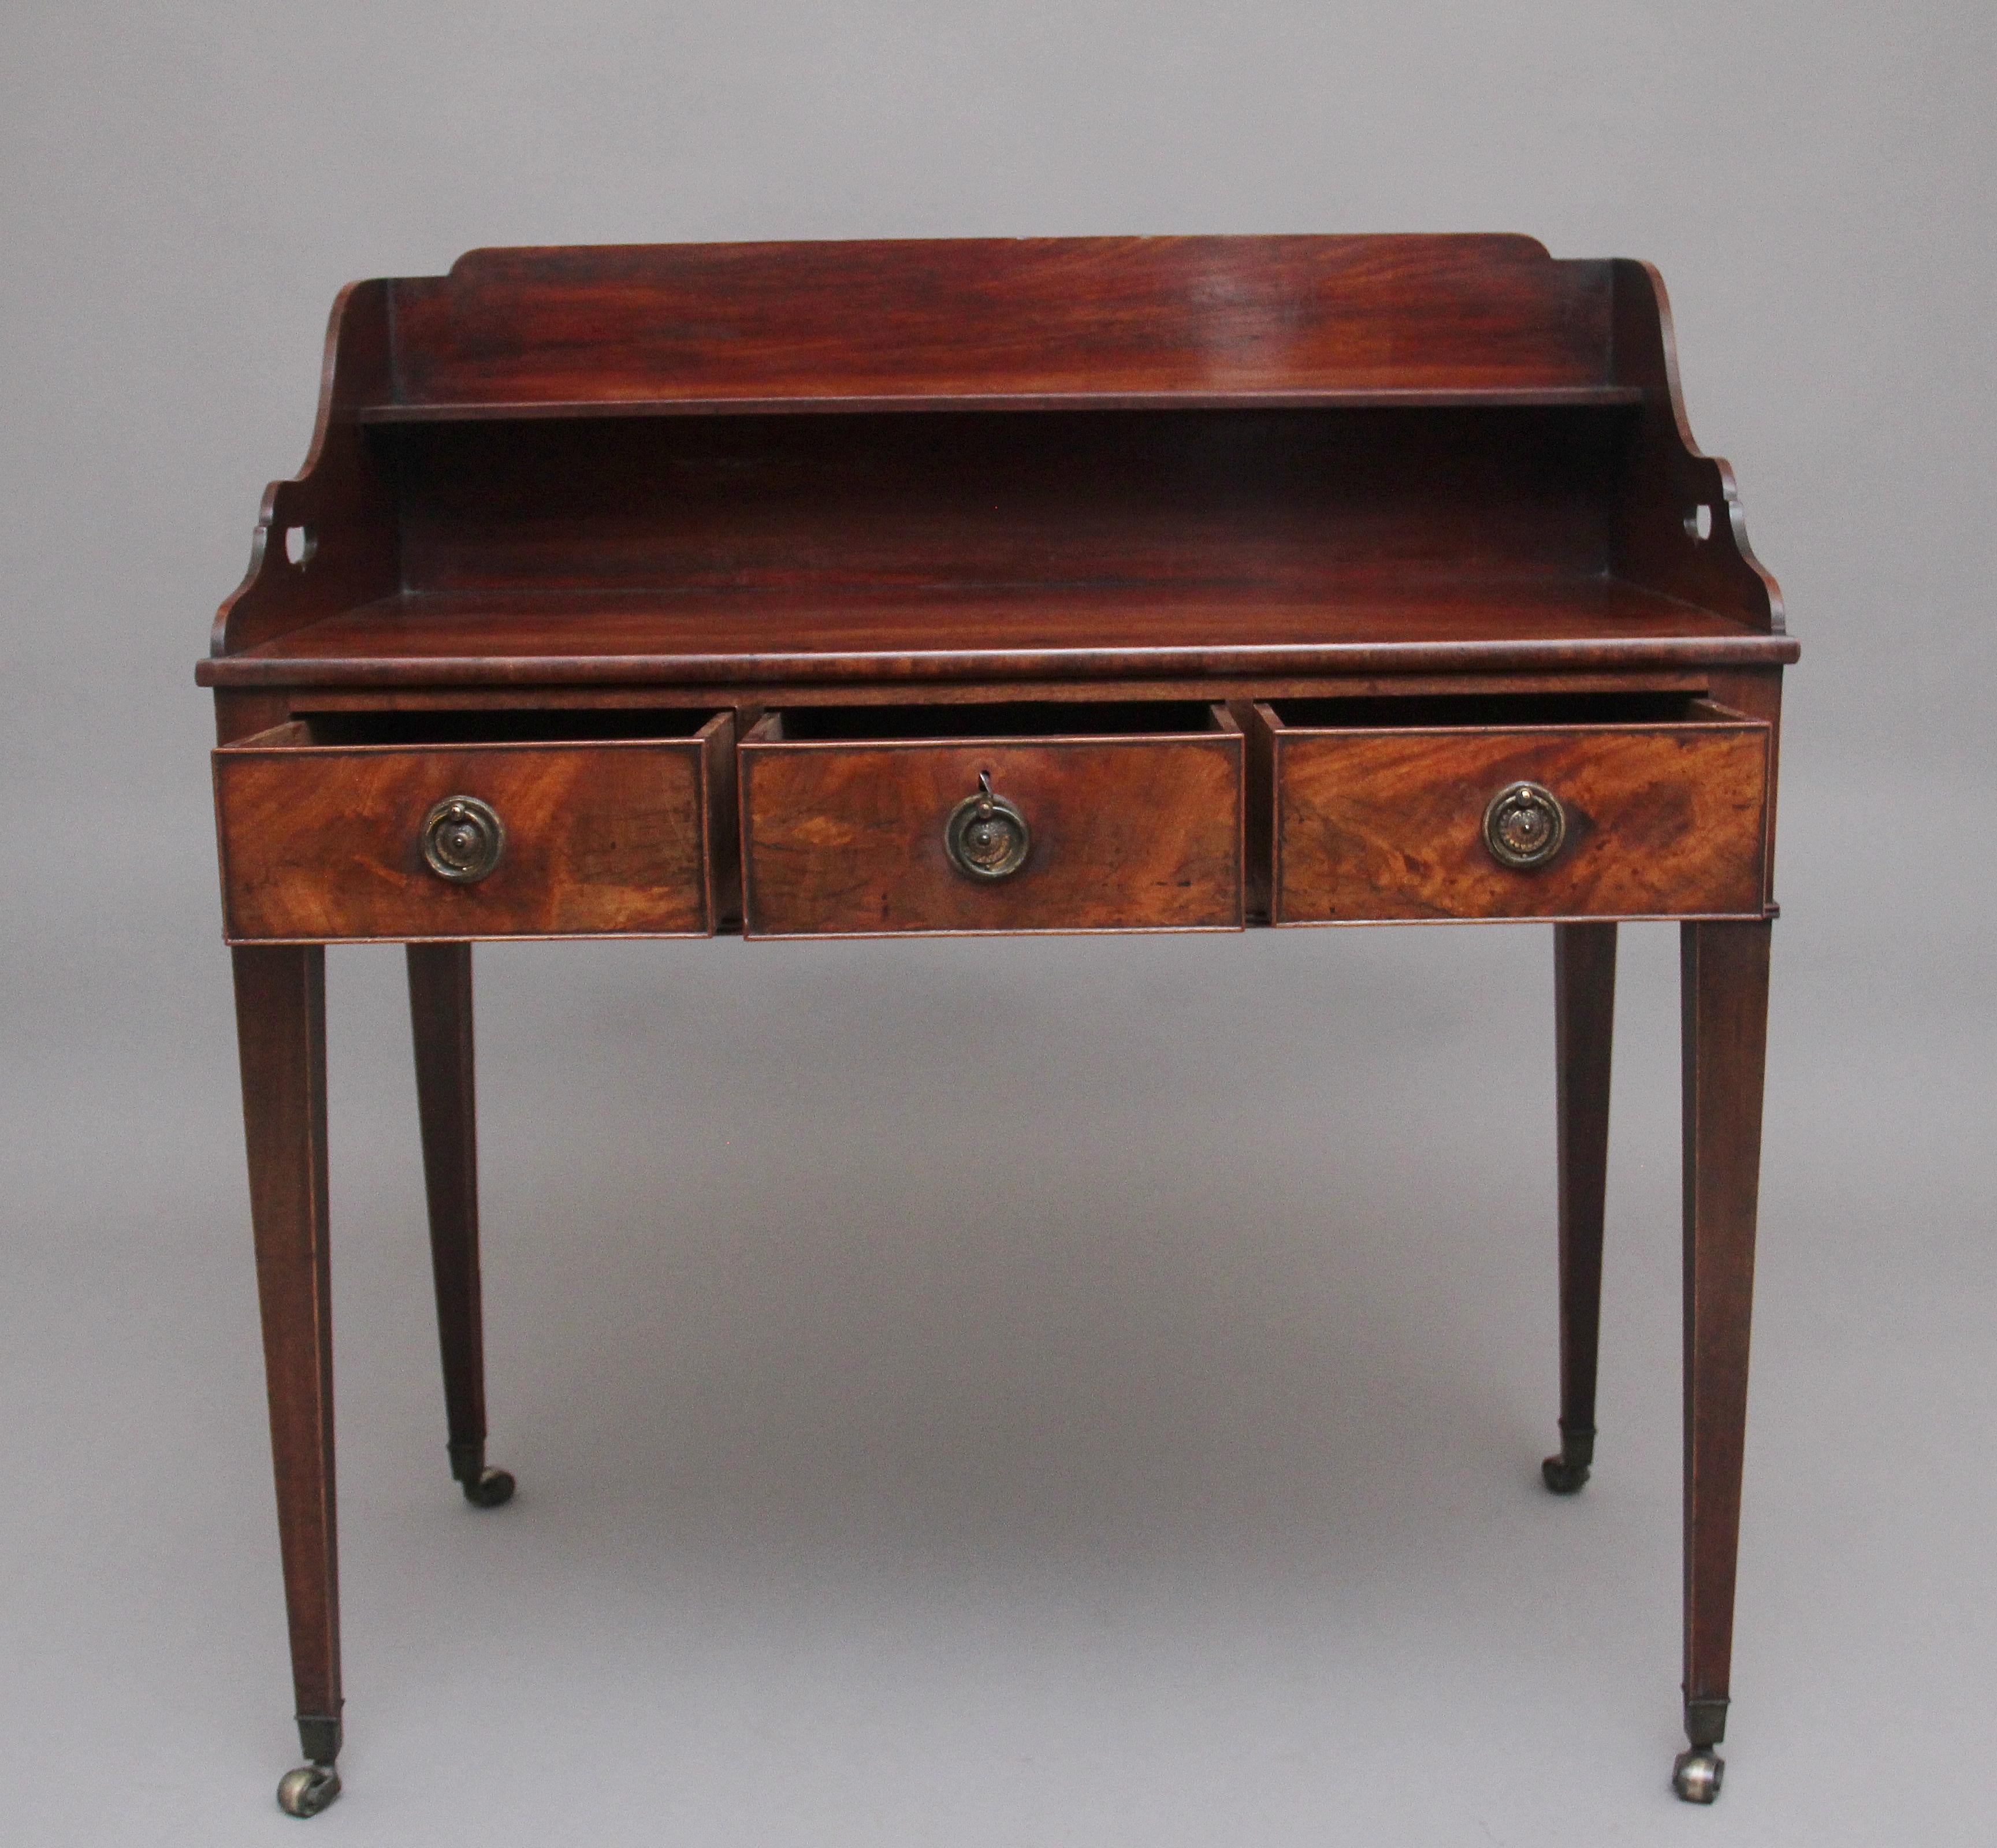 A lovely quality early 19th century mahogany writing table, having a shaped gallery with a shelf, fret cut out carrying handles at the sides of the gallery, three frieze drawers with the original brass ring handles, lovely figuration on the drawer